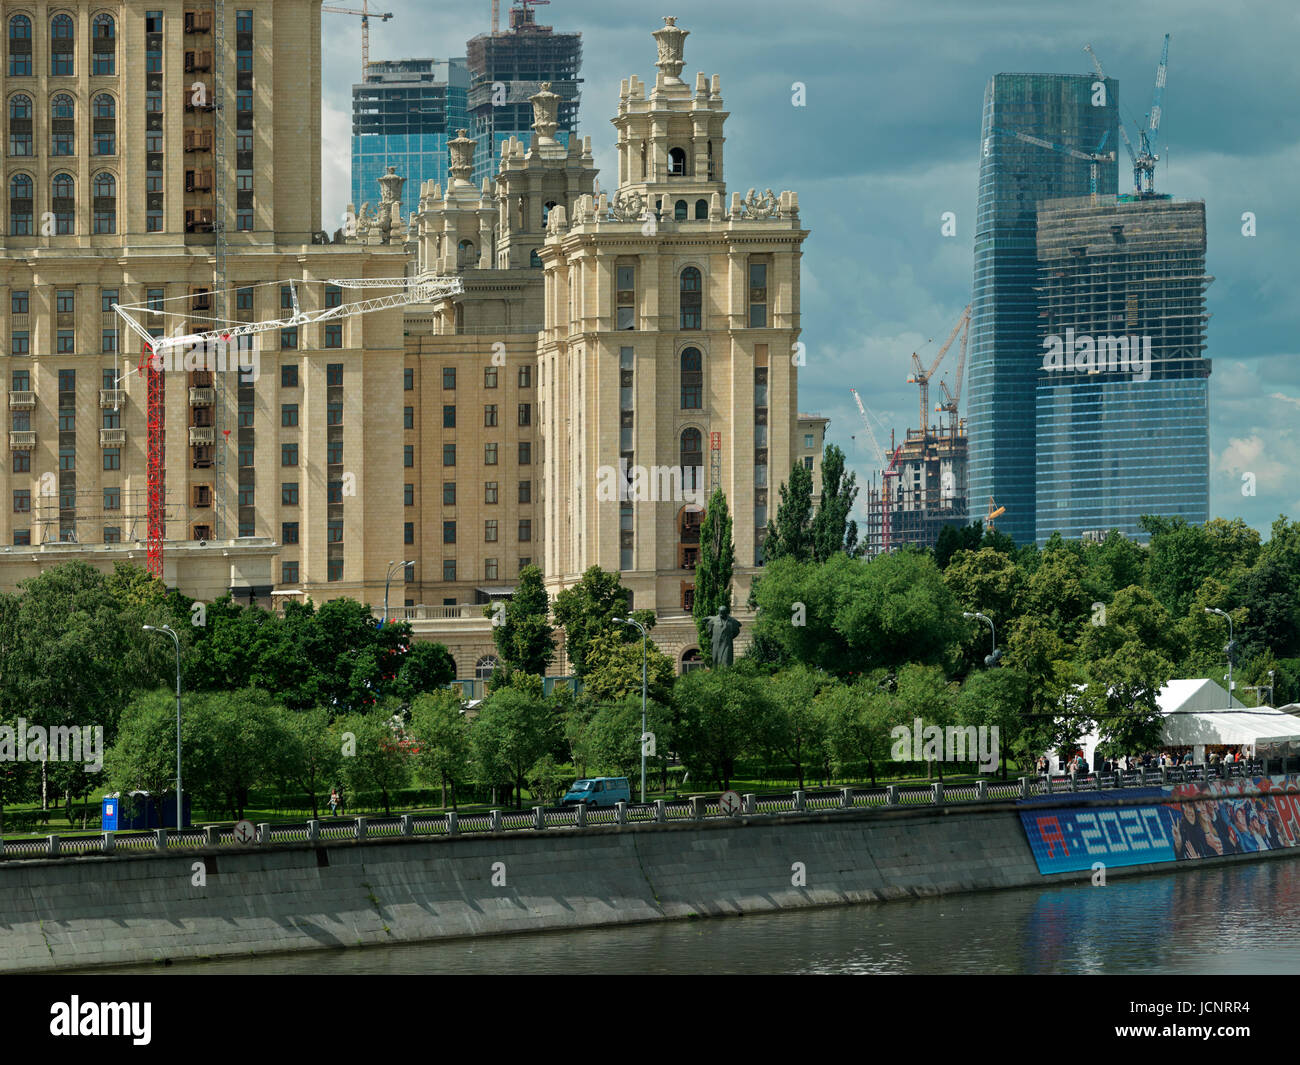 the Stalin building - Hotel Ukraina, one of the Seven Sisters buildings, river Moskva, background Moscow City. Moscow, Russia, Europe Stock Photo